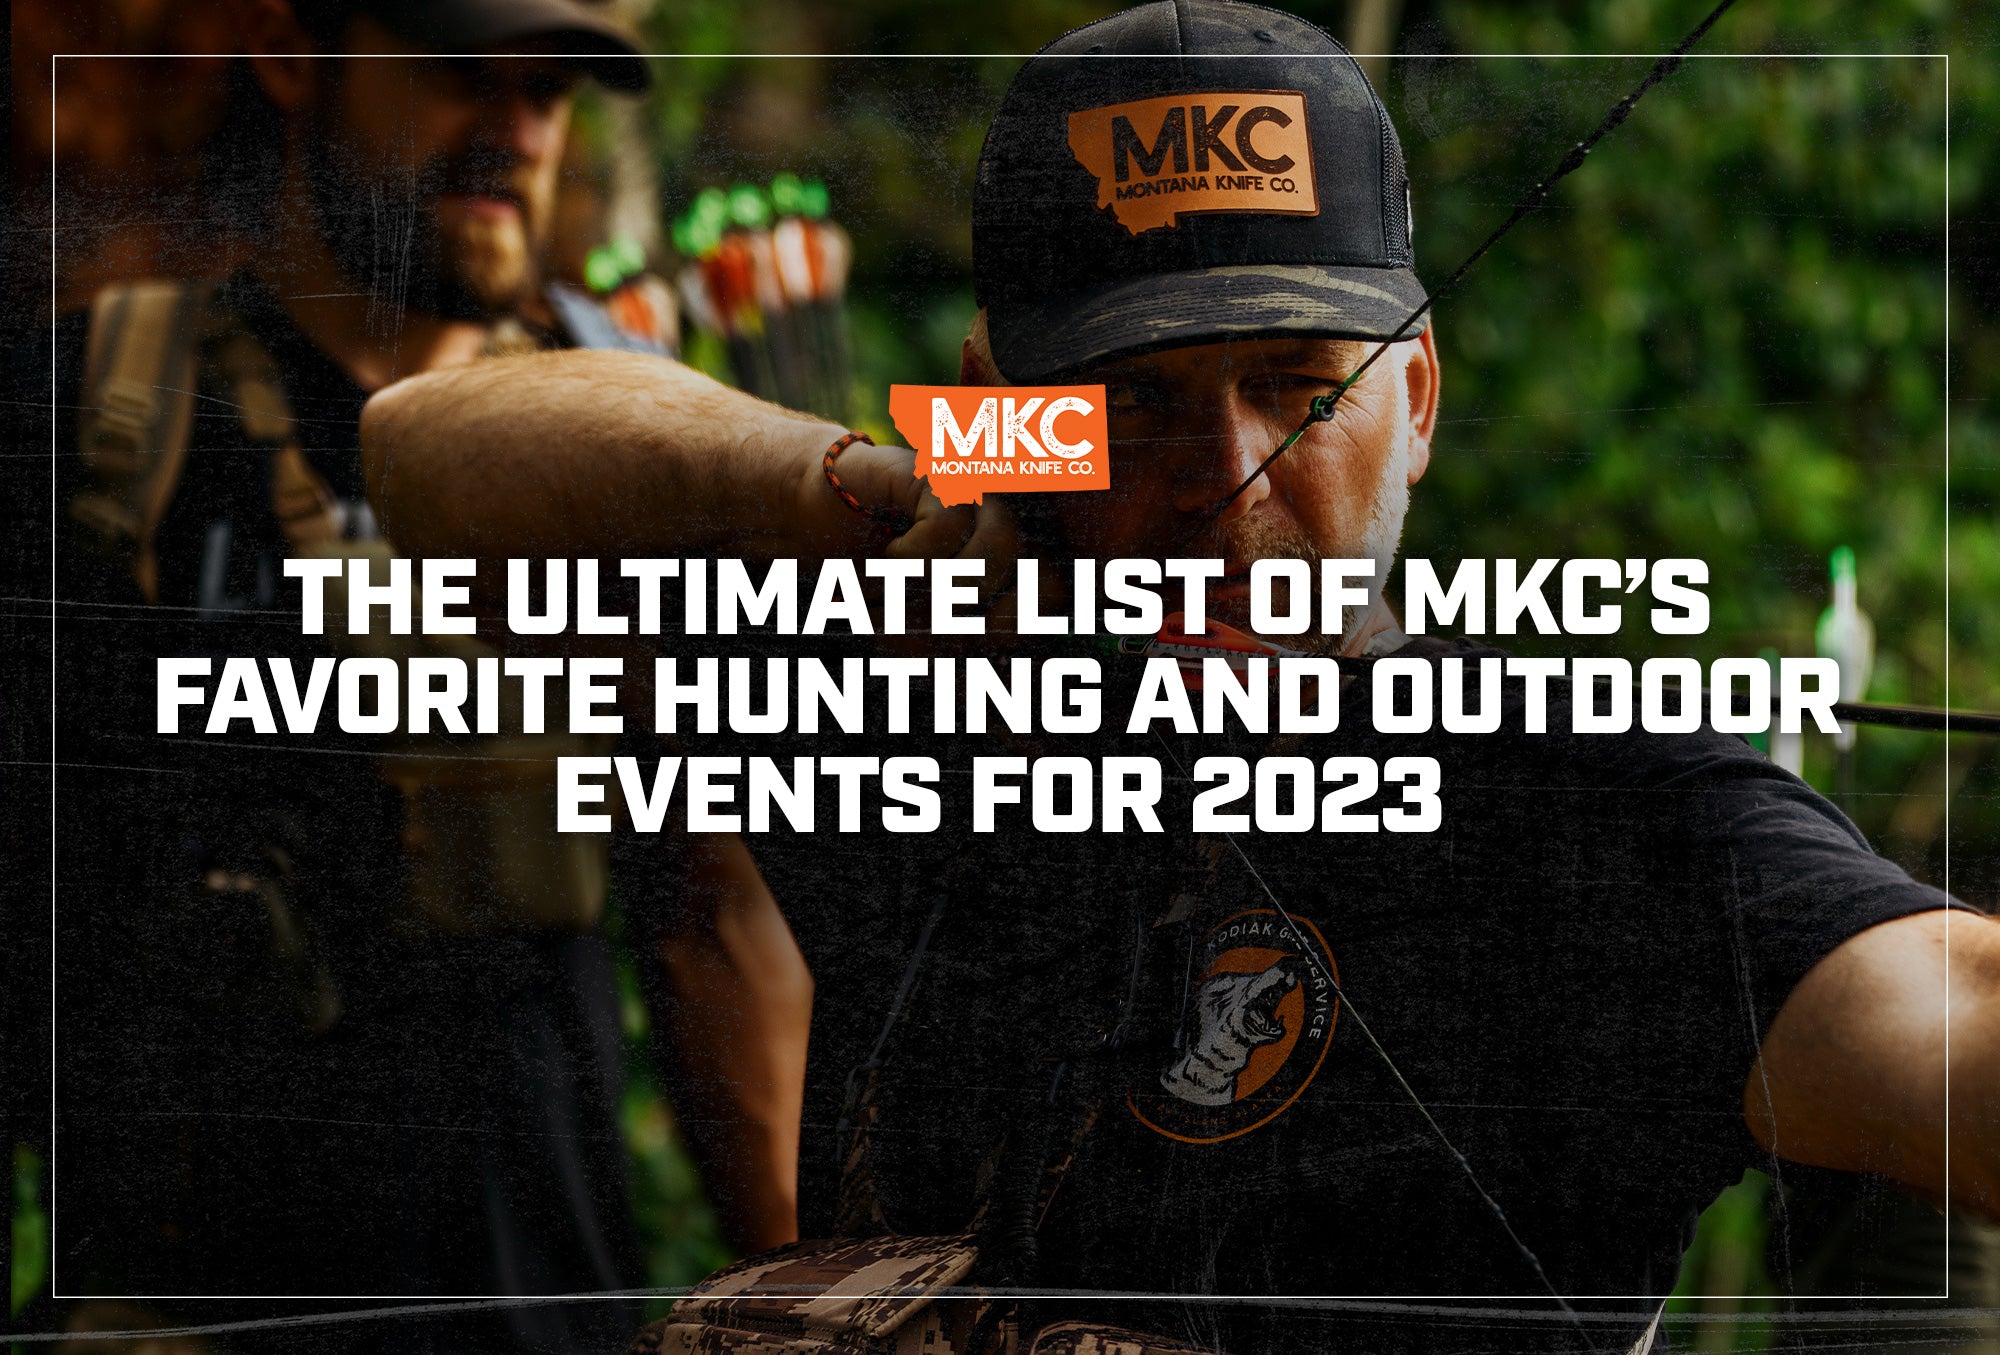 Josh Smith wears an MKC hat as he pulls back on his bow and aims at an outdoor target.